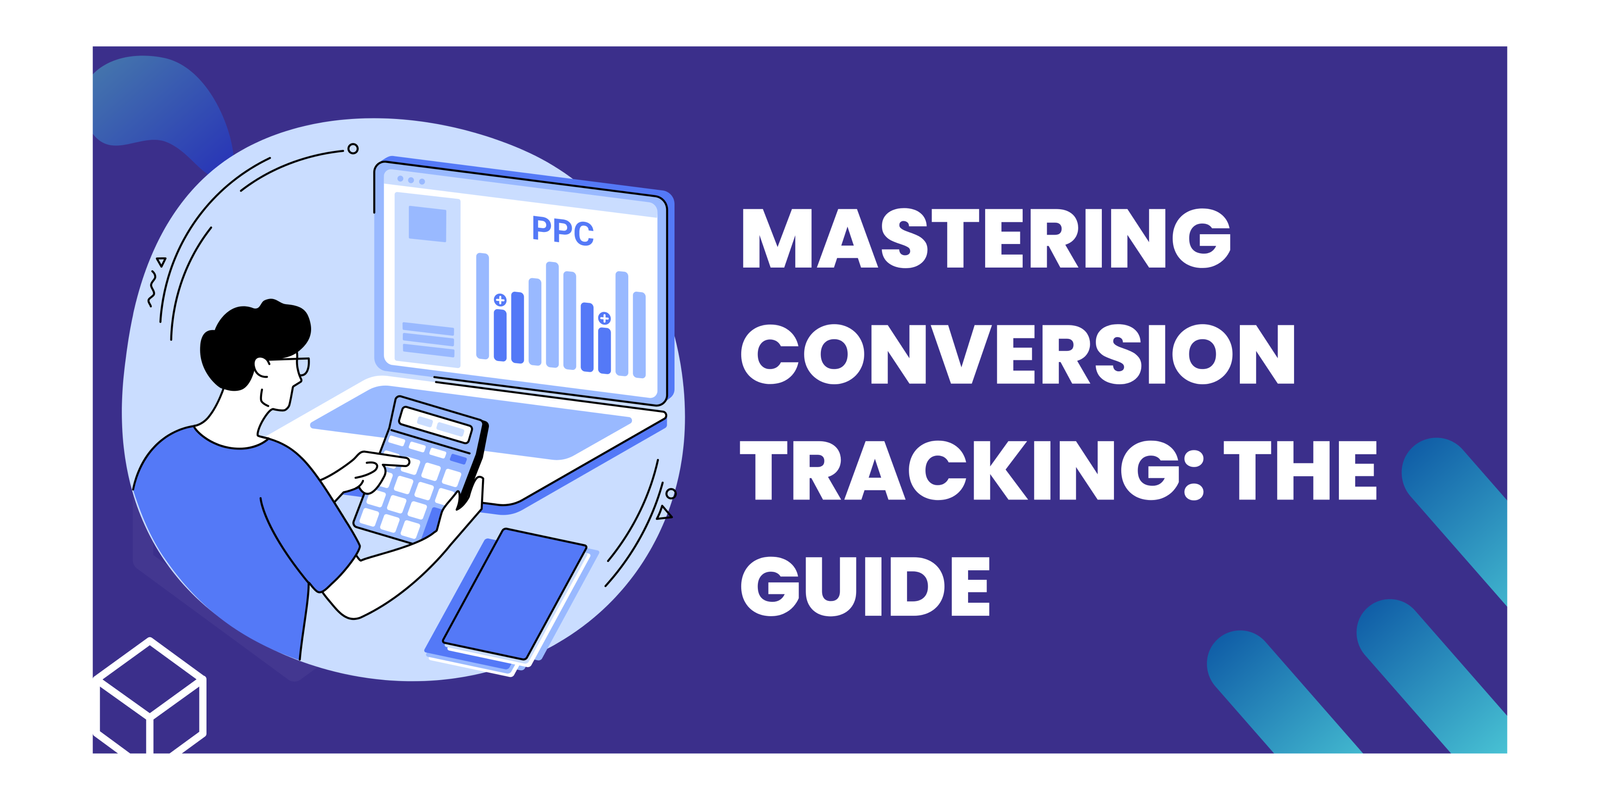 Mastering Conversion Tracking: The Guide